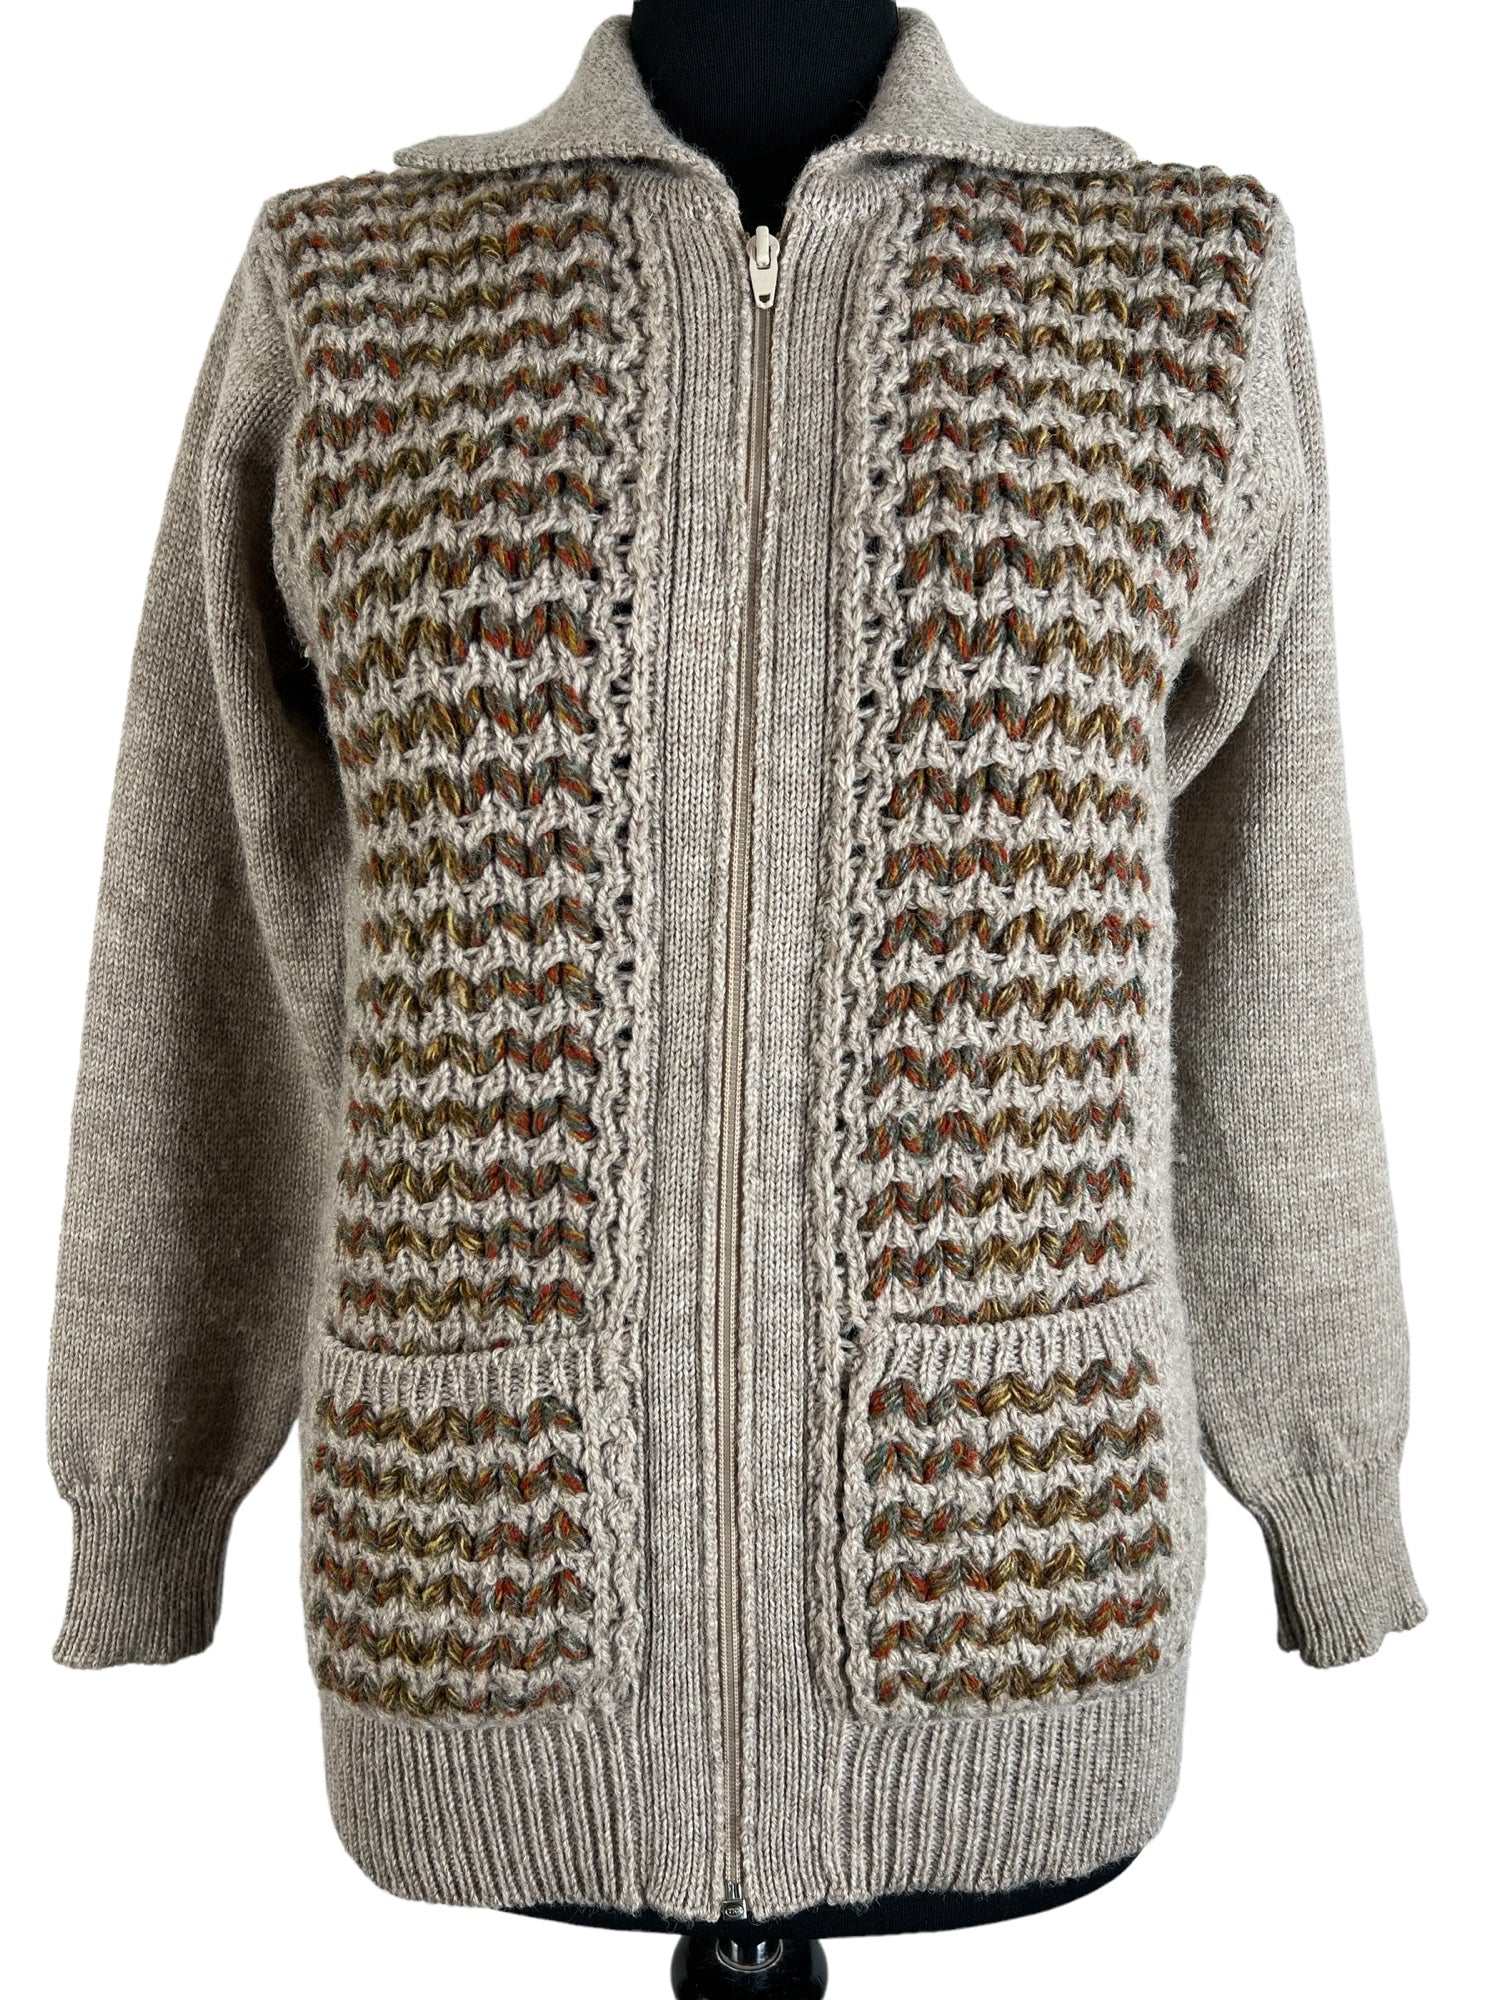 zip front  Wool  womens  Welsh Country Knitwear  vintage  Urban Village Vintage  urban village  UK  style  pure wool  pure new wool  pockets  ladies  knitwear  knitted  knit pattern  knit  fashion  collared  collar  clothing  clothes  cardigan  cardi  button  brown  birmigham  belted  beige  autumnal  autumn  70s  1970s  10